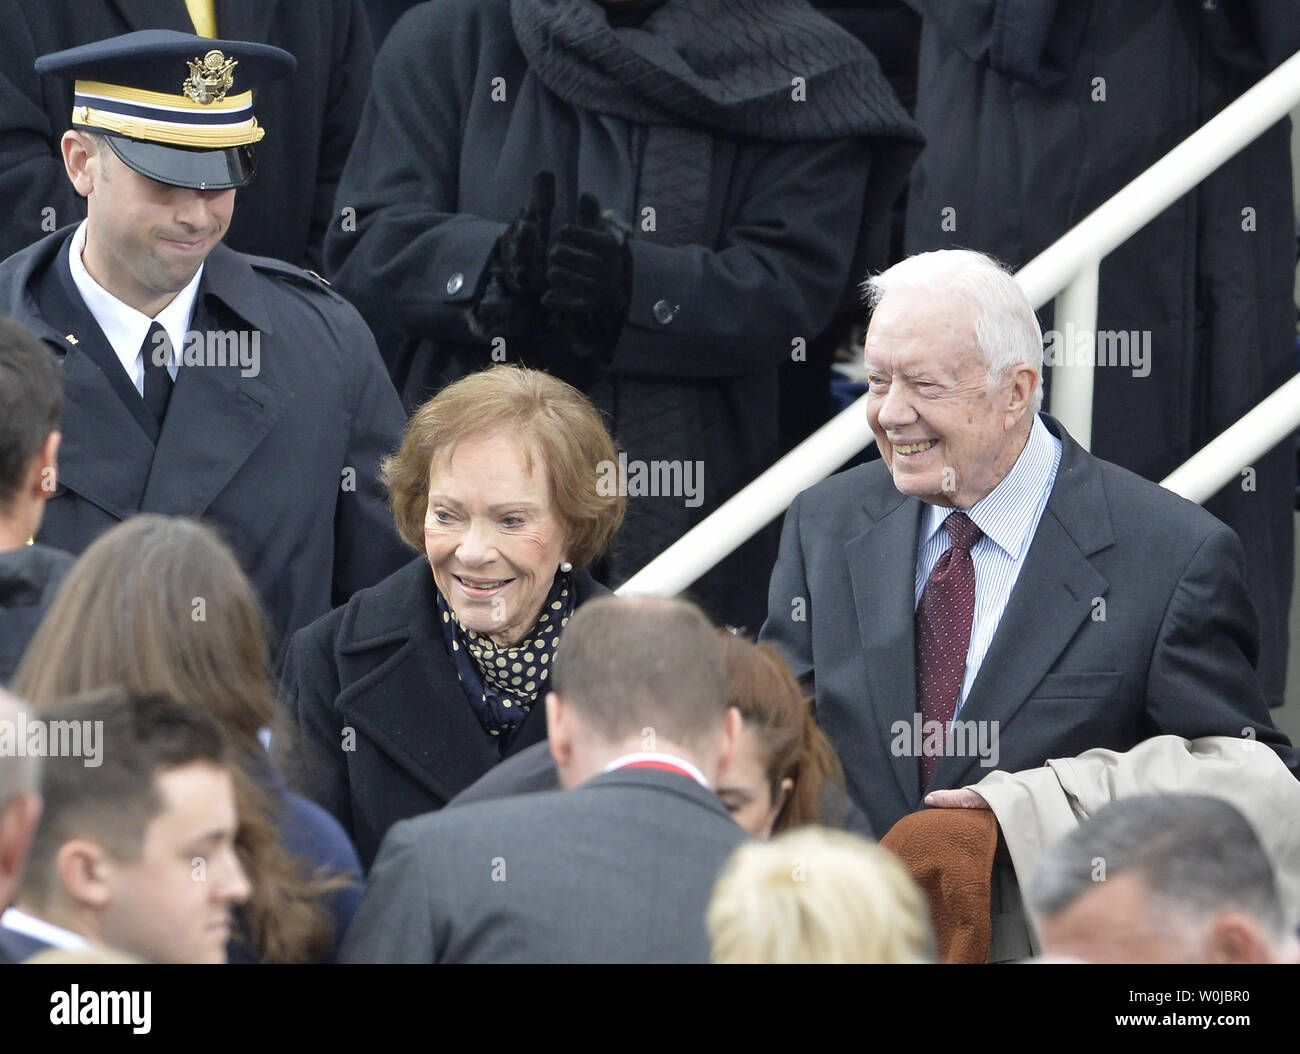 Former President Jimmy Carter and wife Rosalyn arrive for the inauguration ceremony at the Capitol on January 20, 2017 in Washington, D.C.  Trump becomes the 45th President of the United States.  Photo by Mike Theiler/UPI Stock Photo